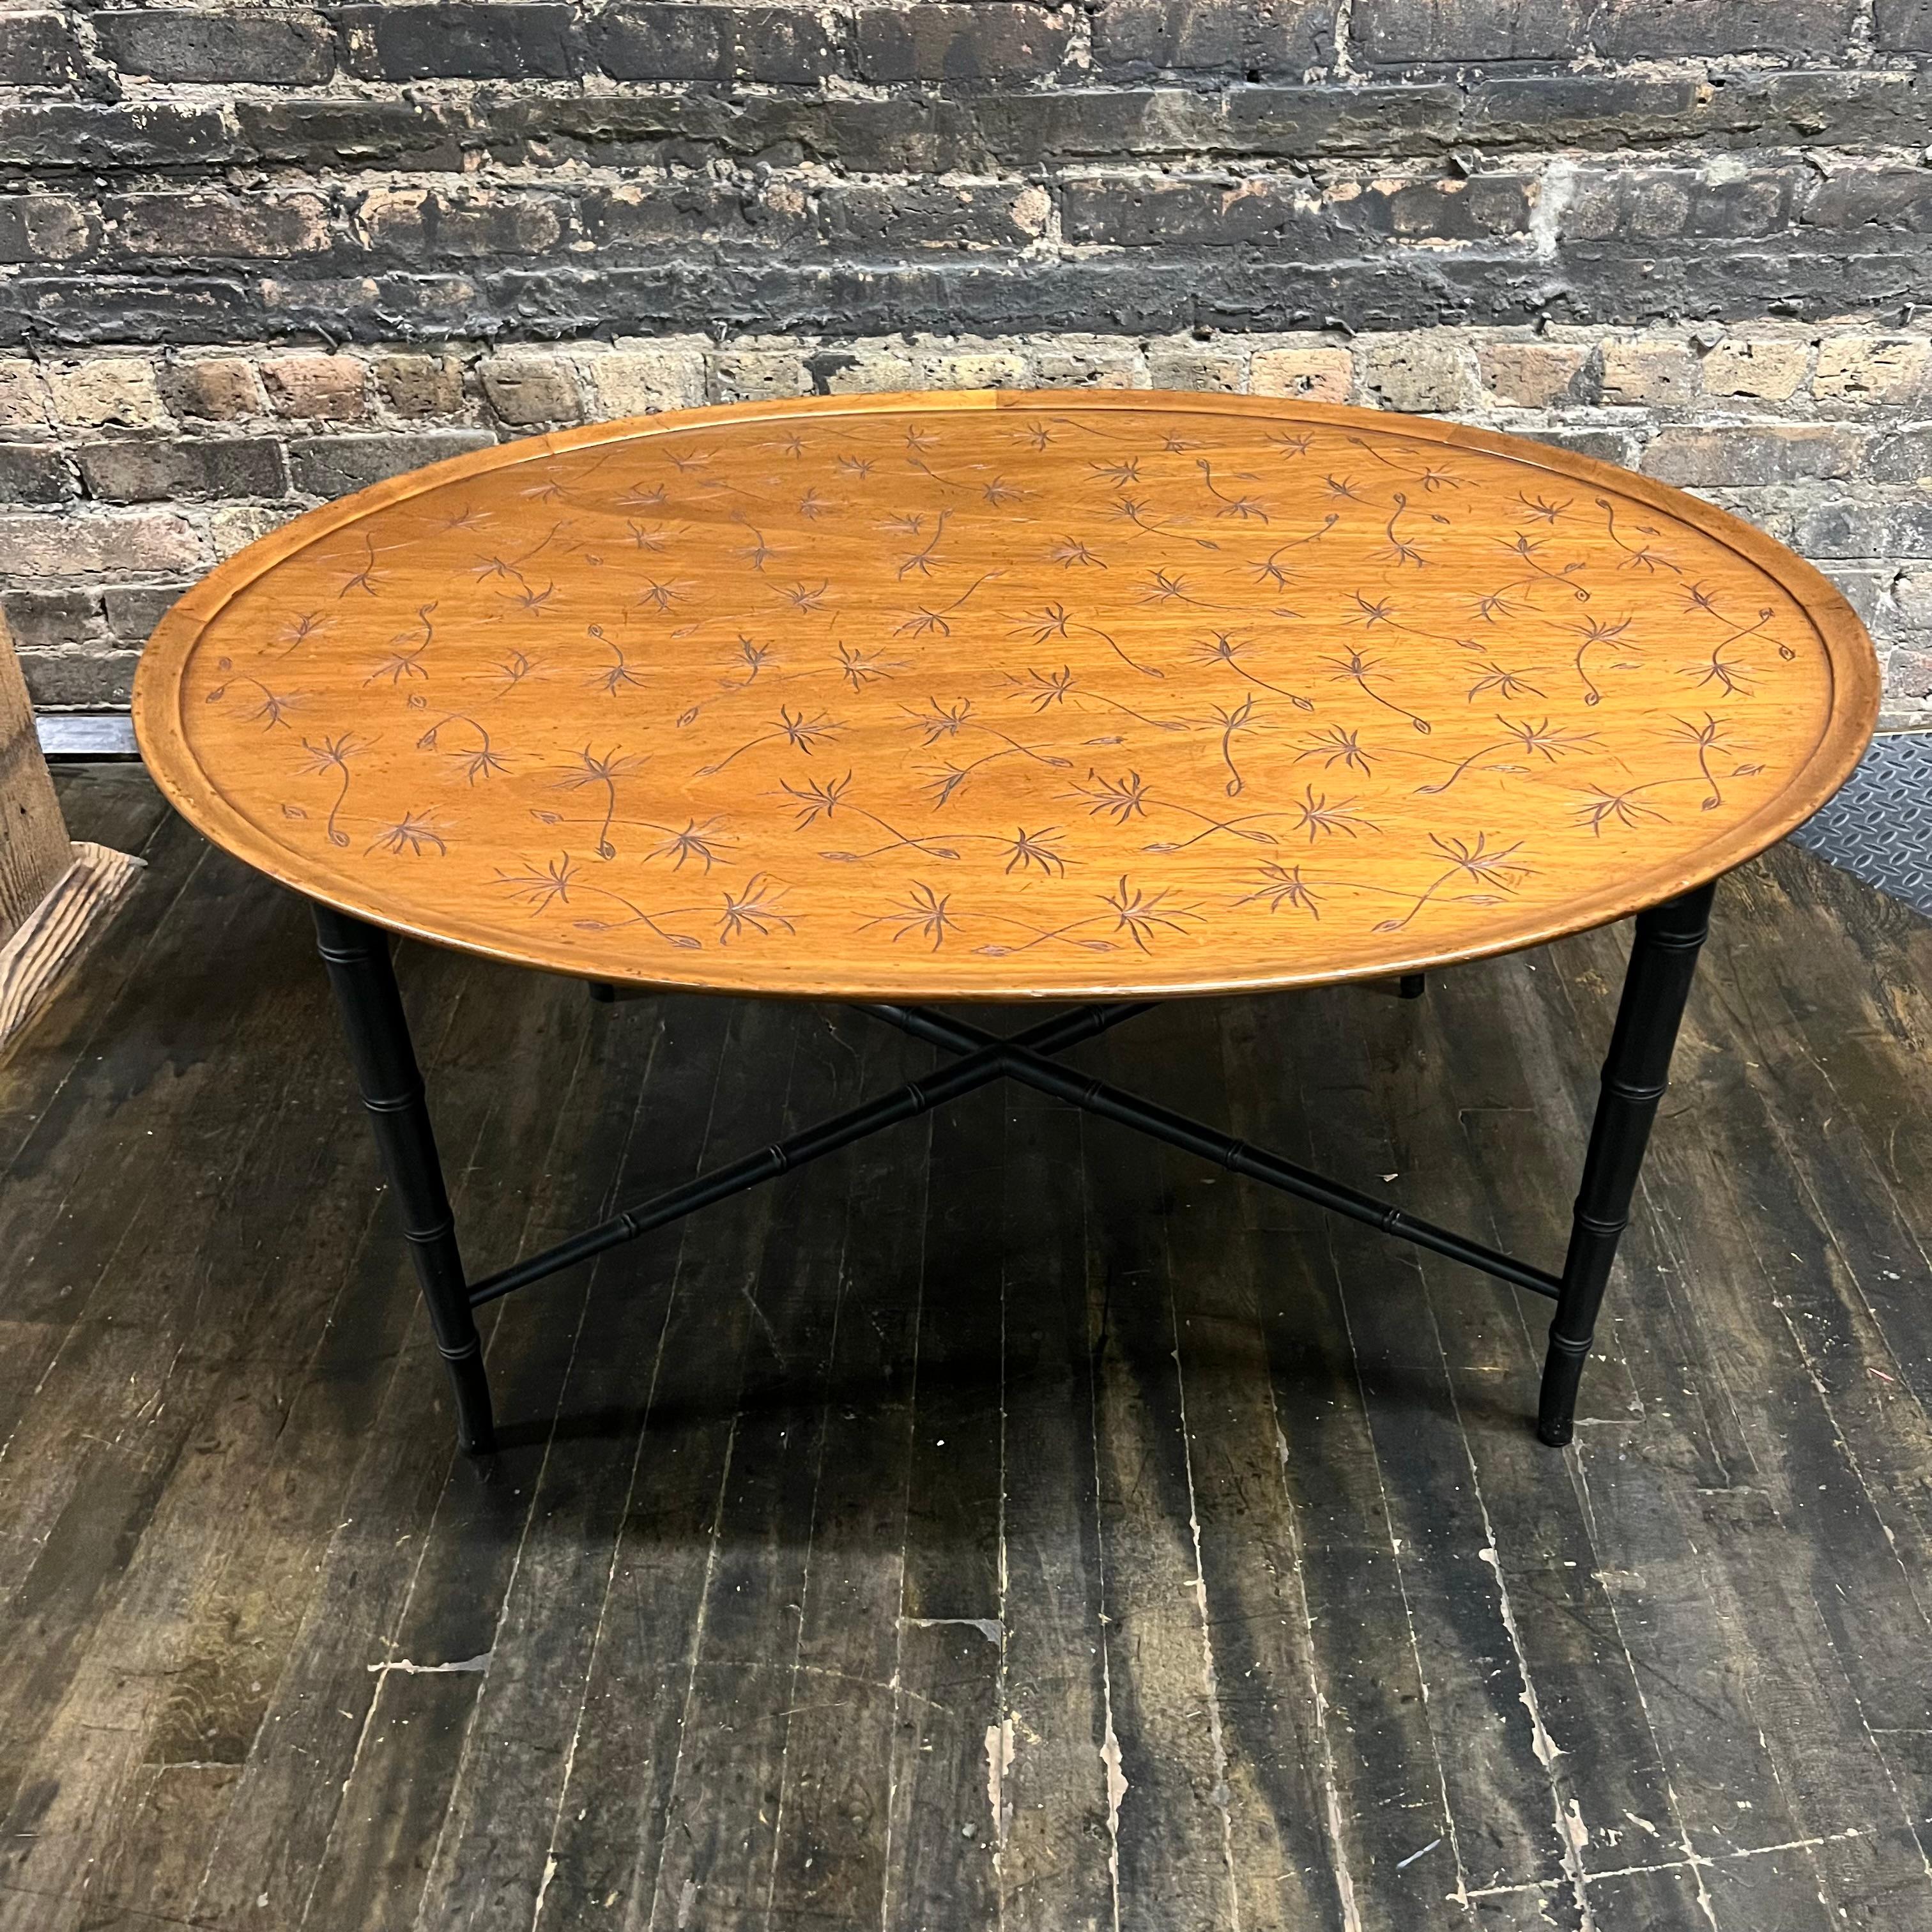 Lovely midcentury coffee table by Kittinger Furniture Company (Buffalo, NY). This oval table has a lovely walnut top that is incised with a dandelion pattern (in black). The black lacquered base has a faux bamboo styling with an x stretcher between